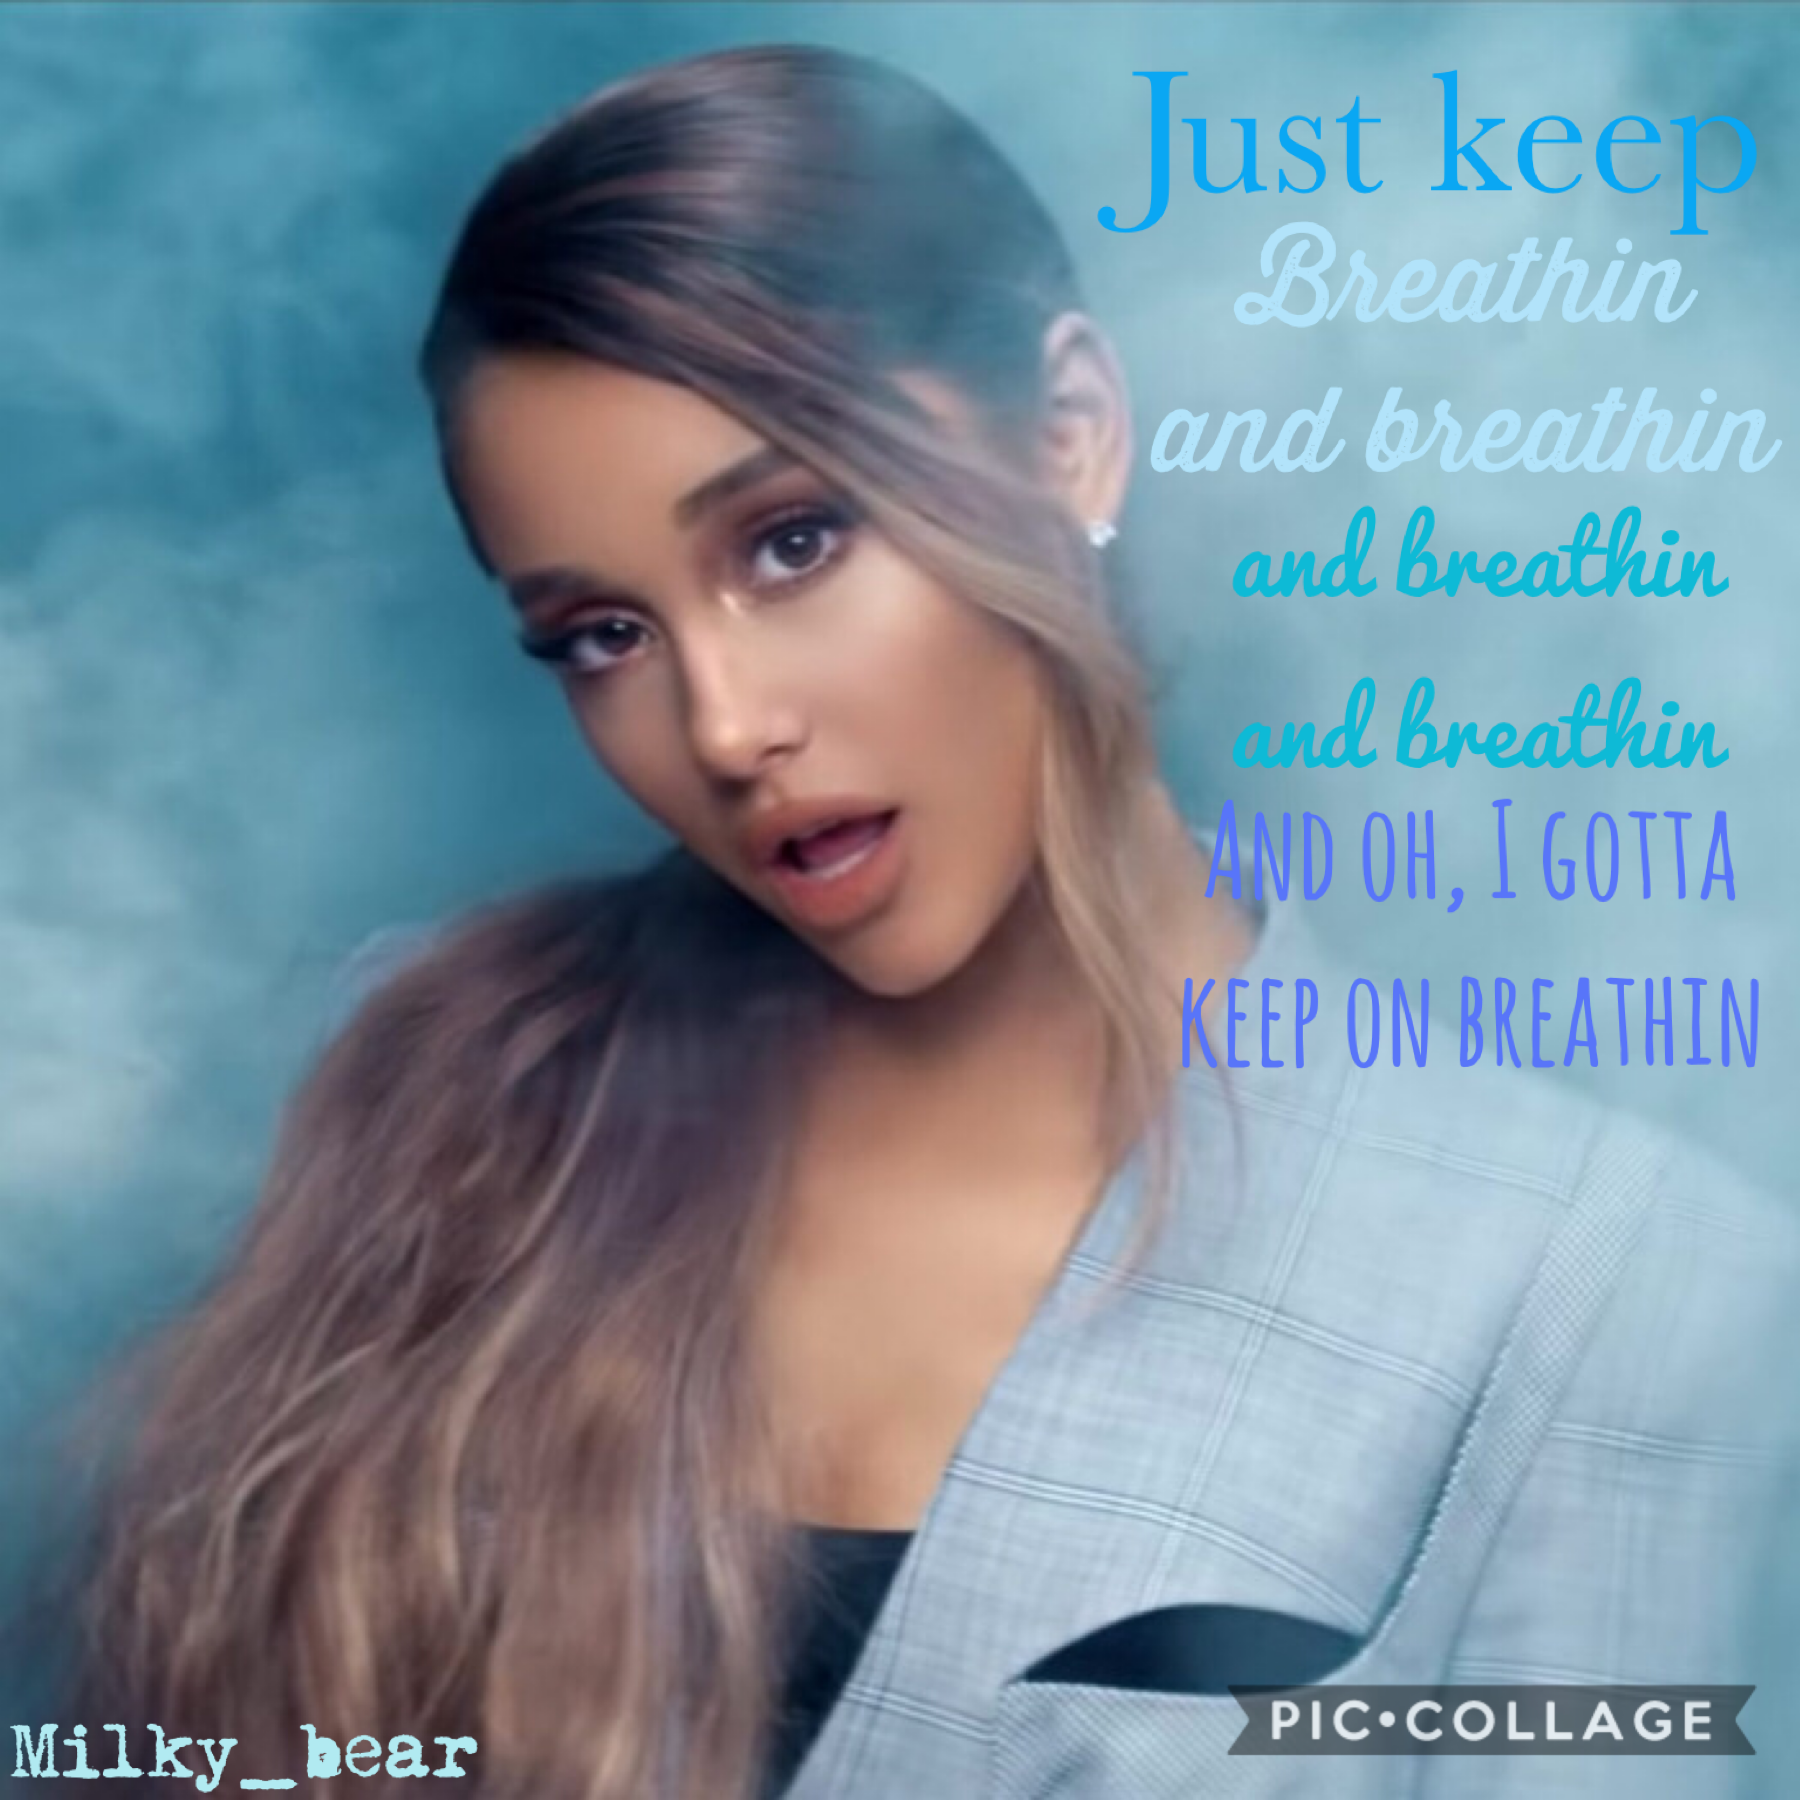 Really simple collage, but one of my favourite Ariana Grandes song 